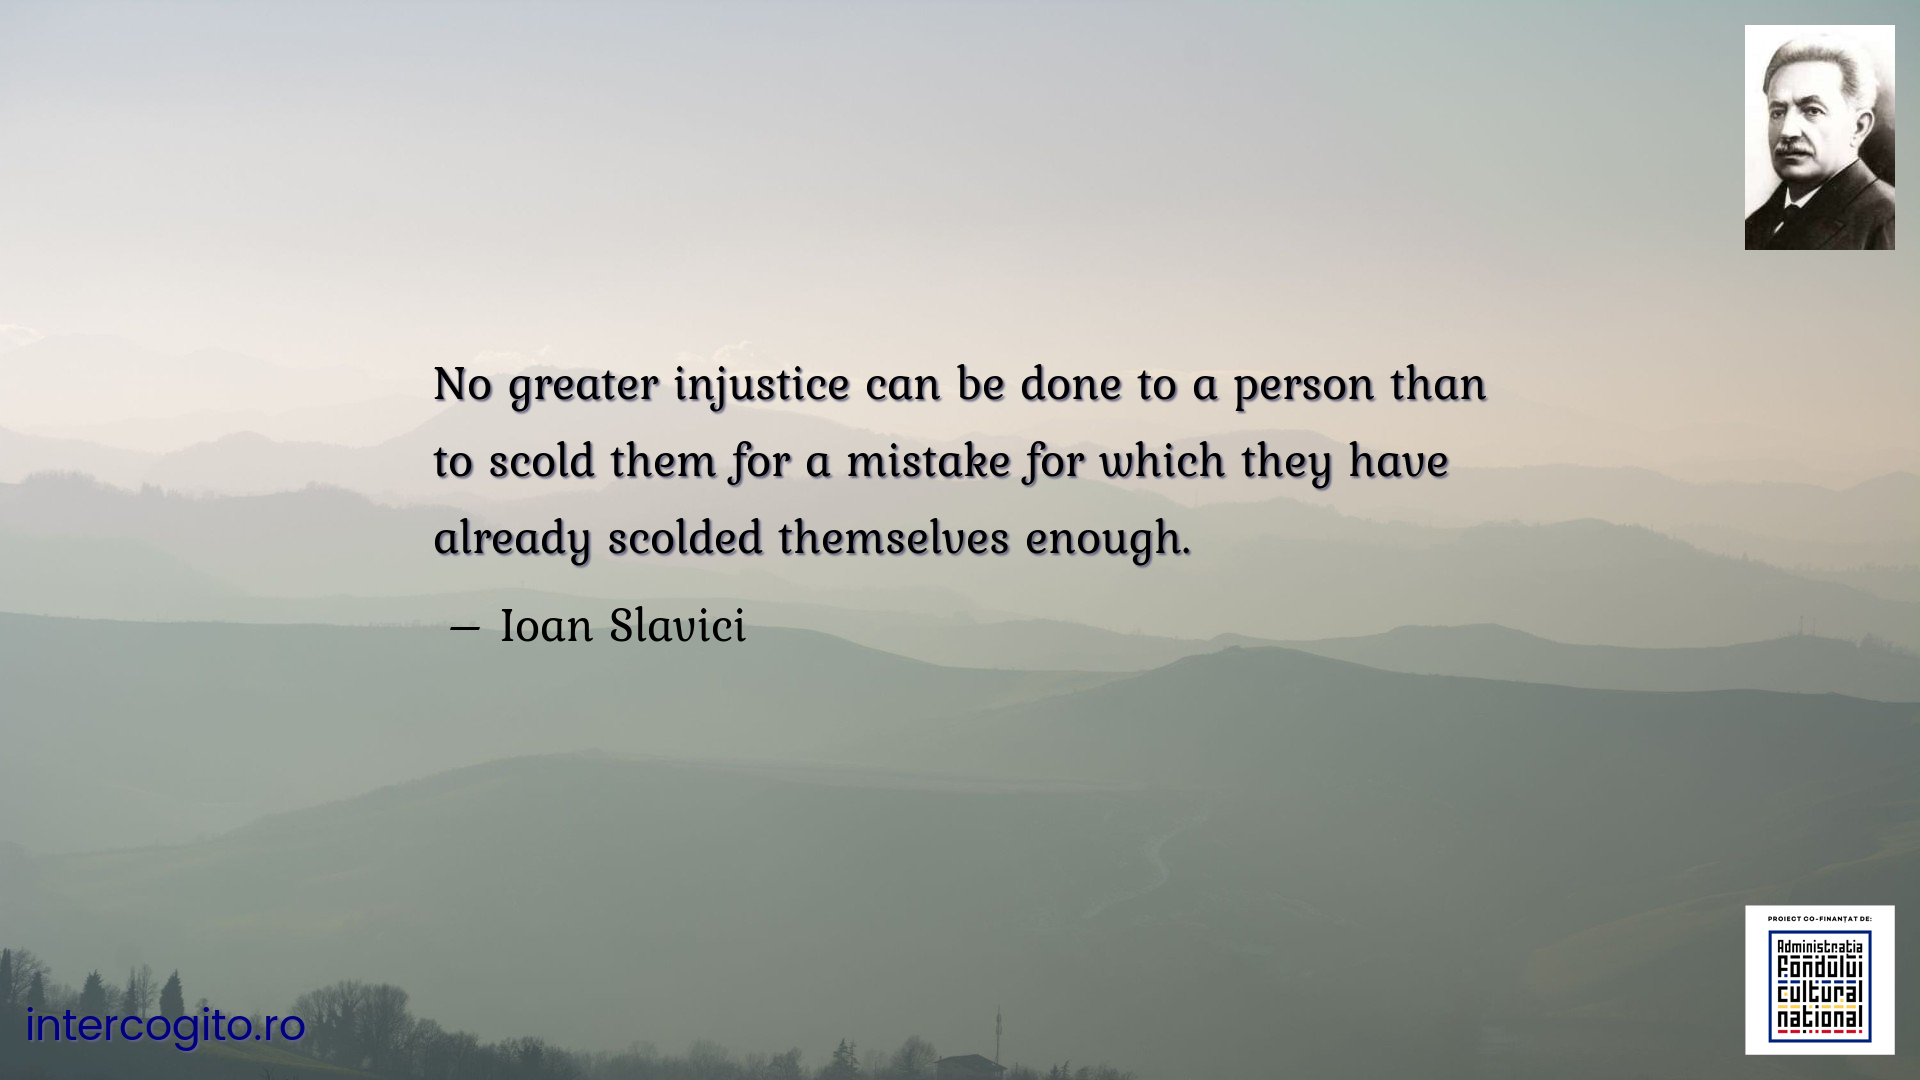 No greater injustice can be done to a person than to scold them for a mistake for which they have already scolded themselves enough.